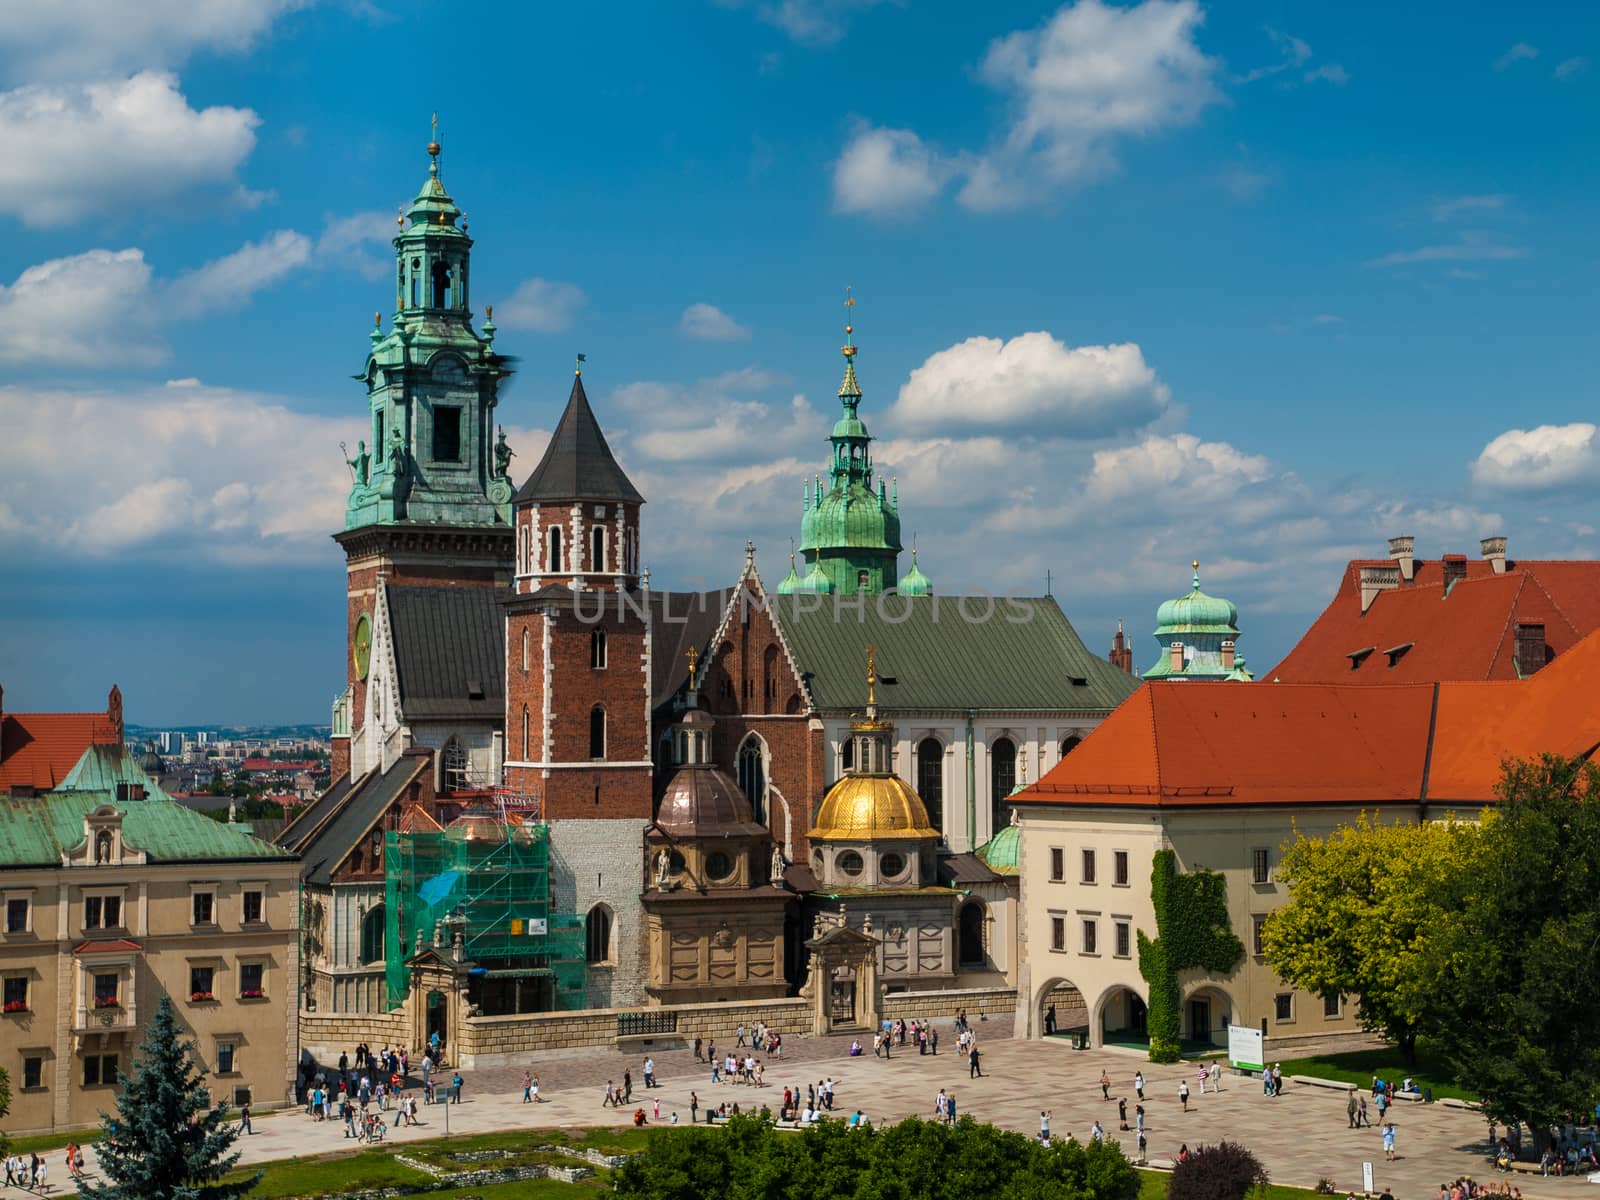 Wawel castle in Cracow by pyty